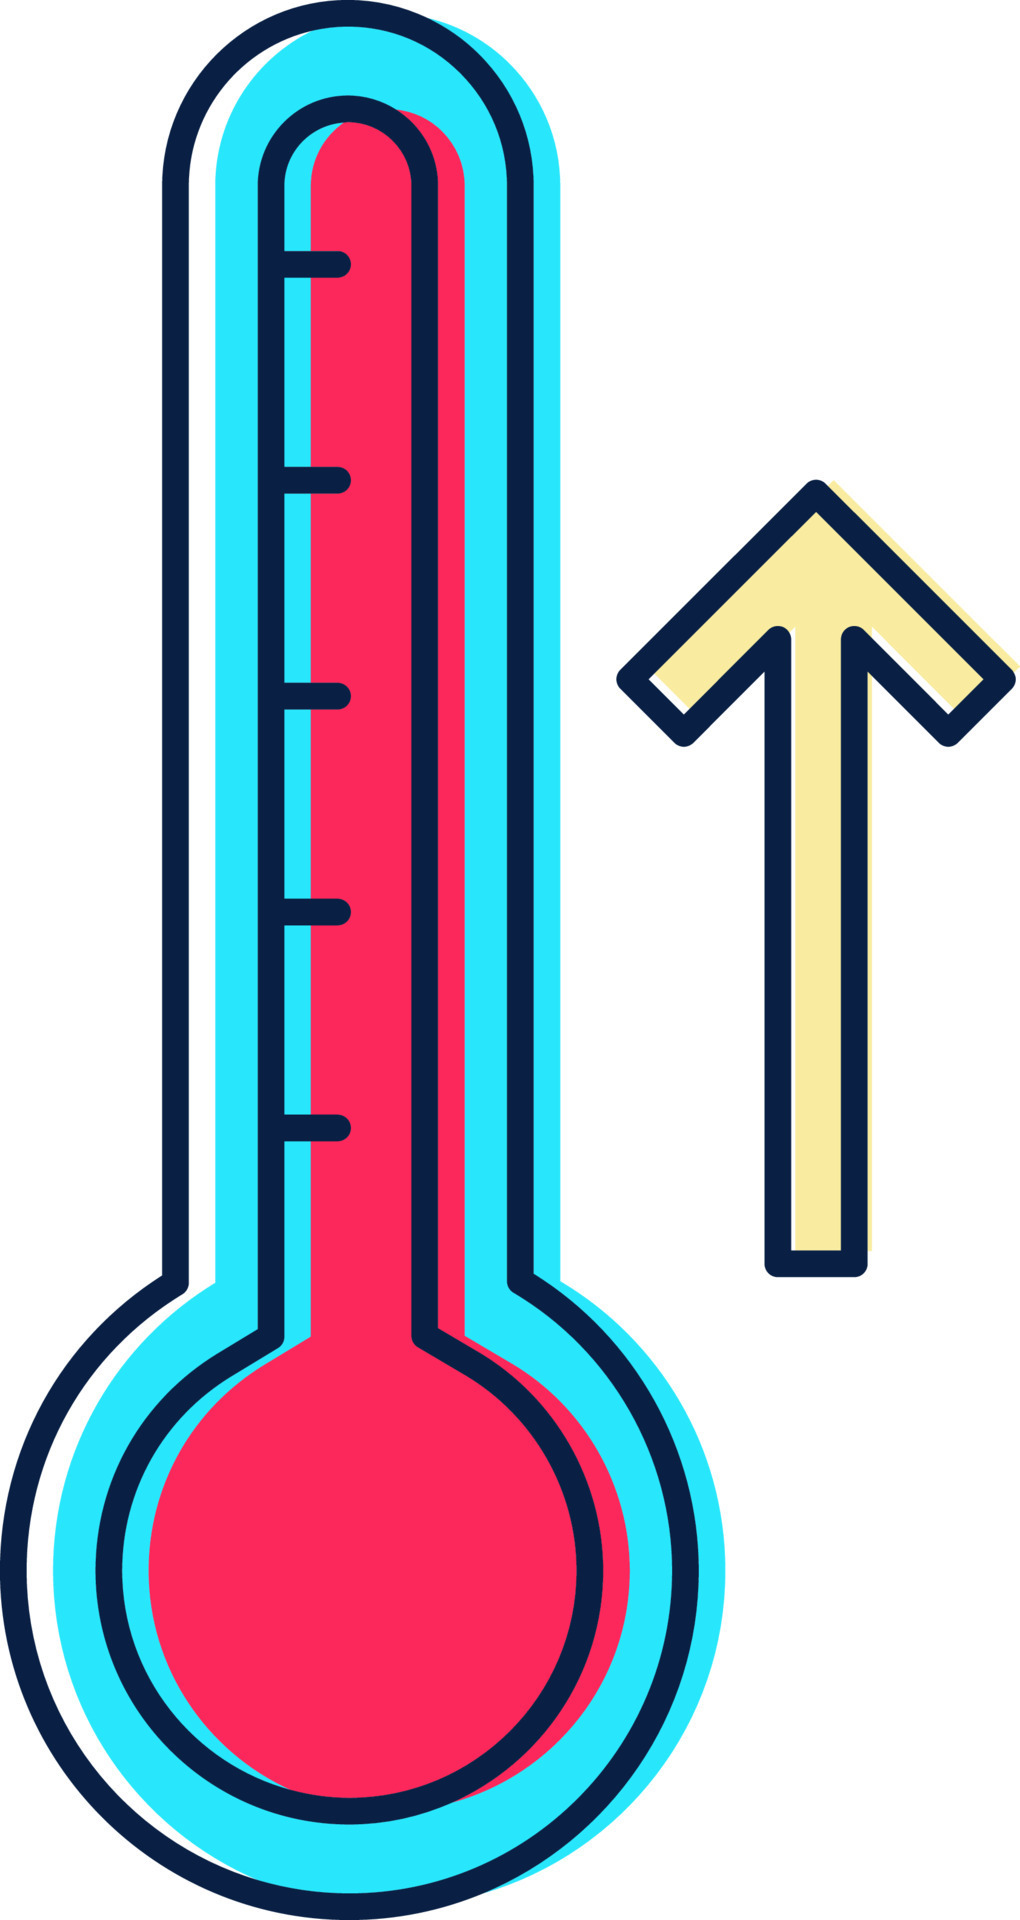 Growing Thermometer Mercury Scale Of High Temperature Red And Blue